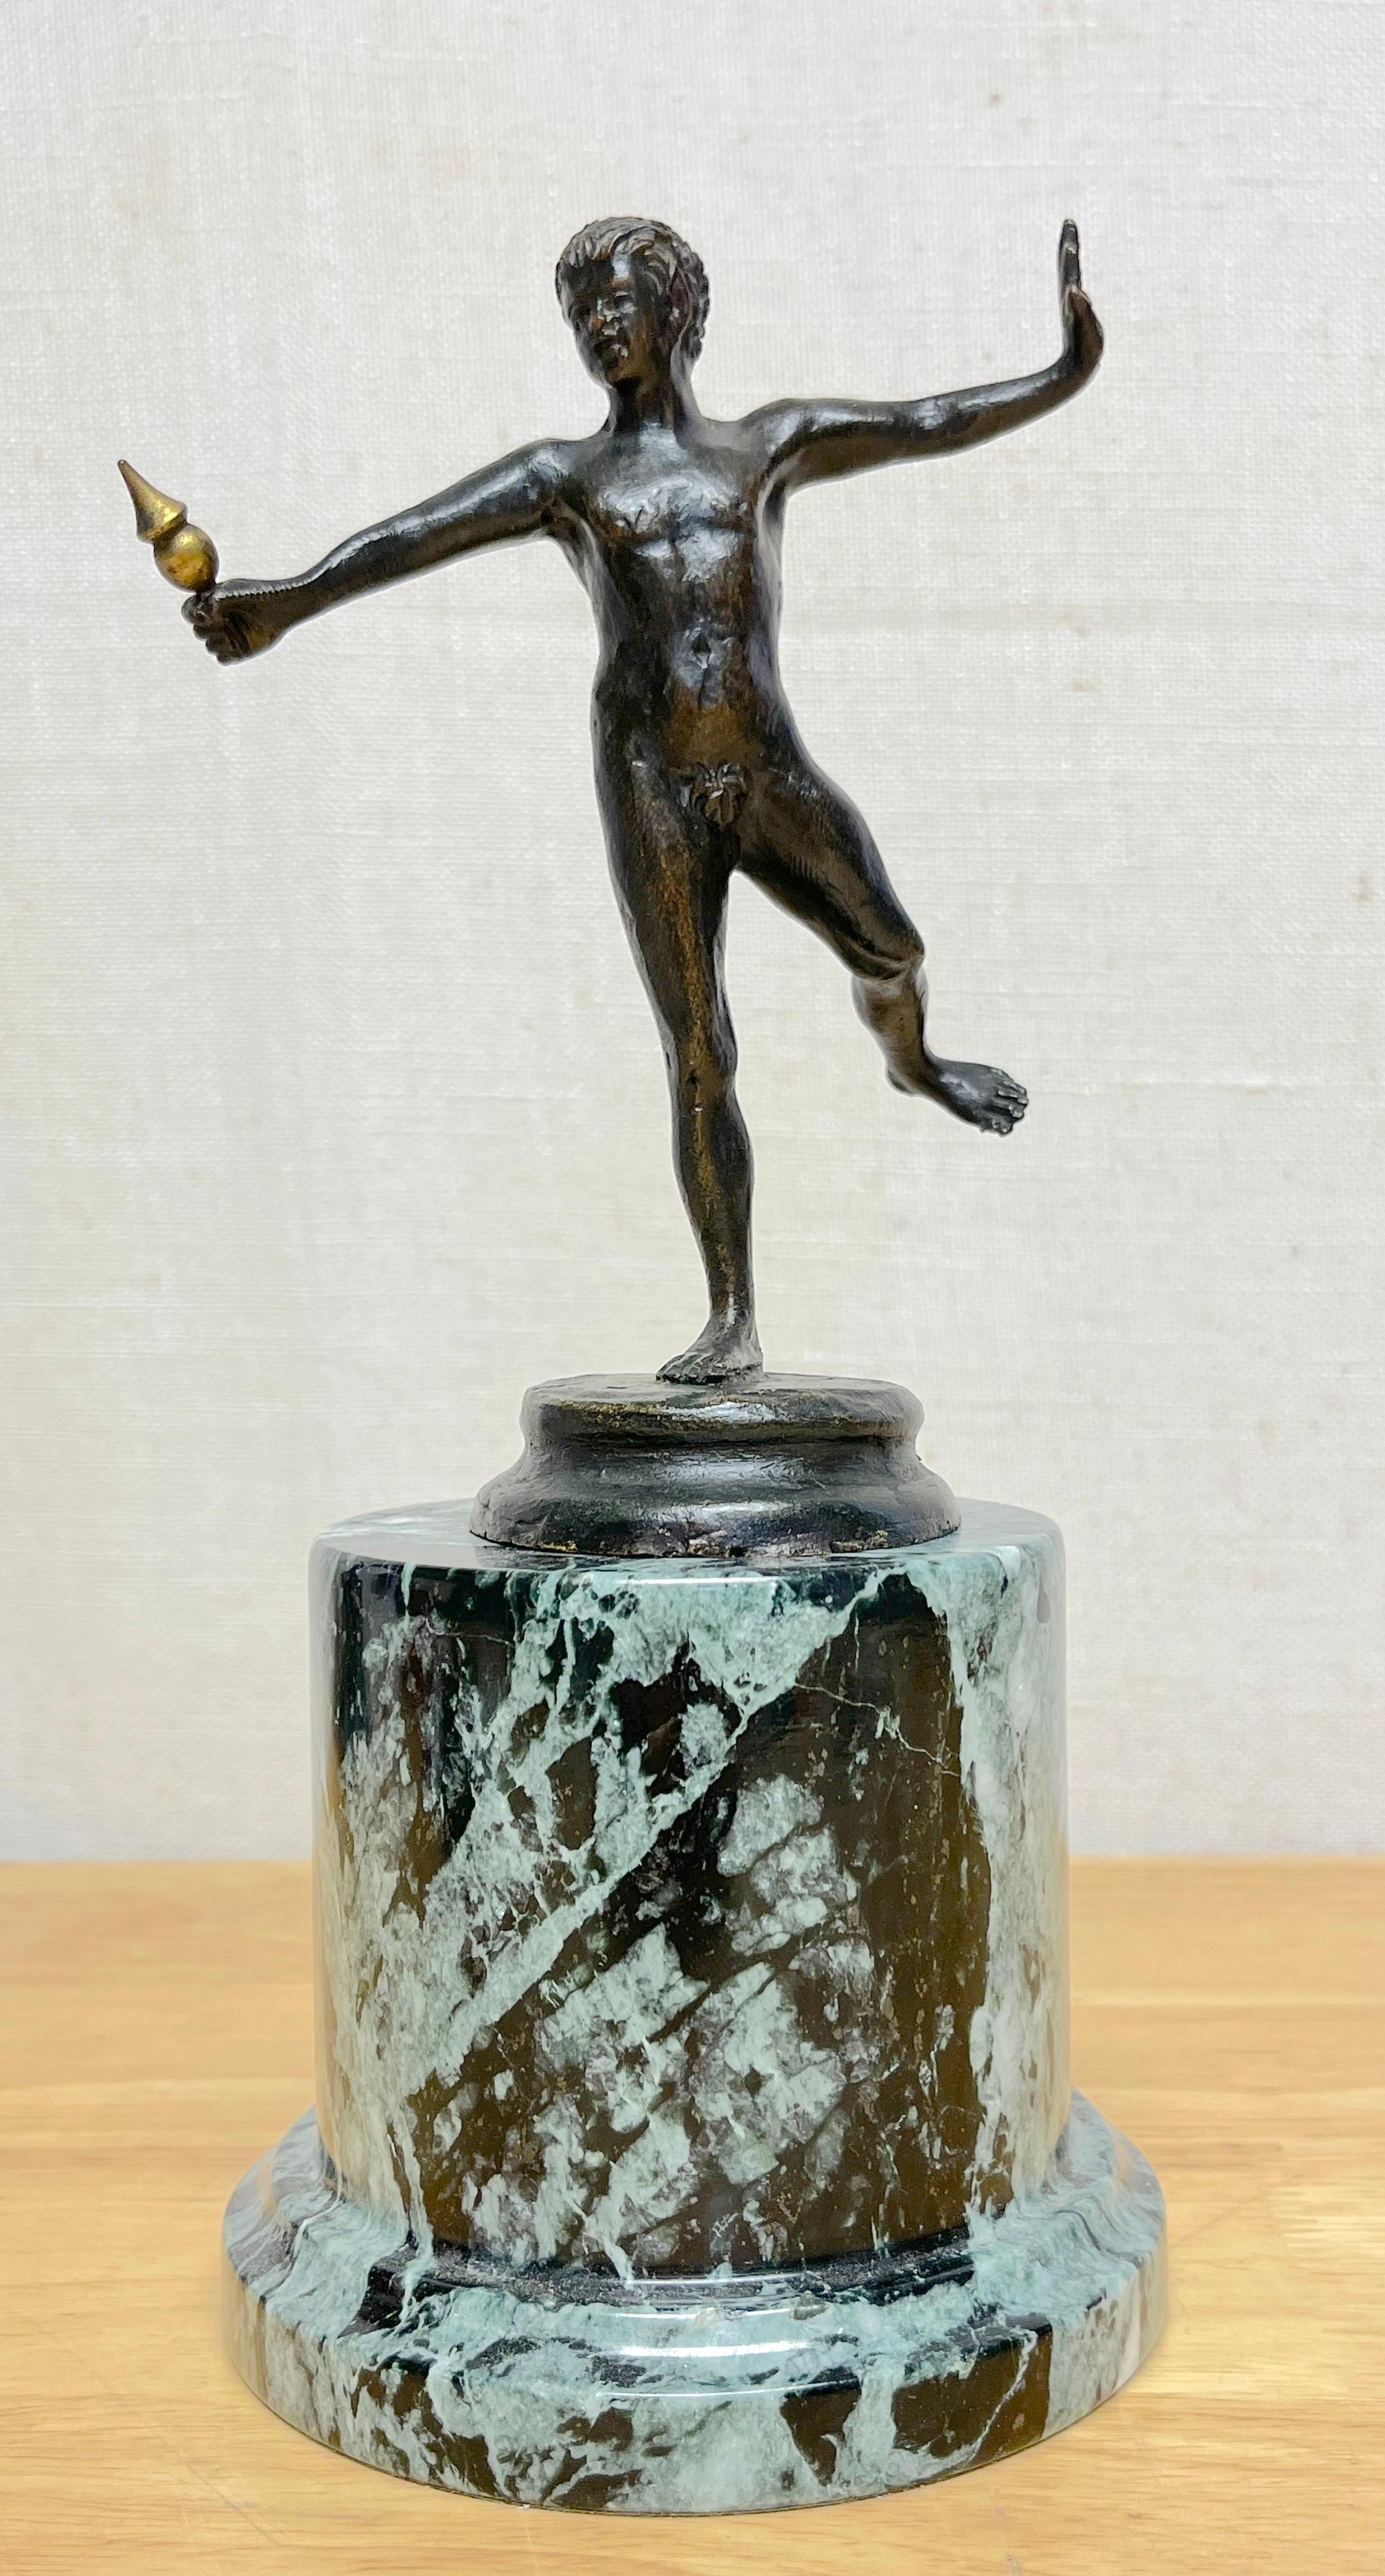 Diminutive Grand Tour bronze 'Balancing Faun' on marble pedestal
Italy, The sculpture circa 1890, the marble pedestal later addition 20th C

A small well executed bronze sculpture of a nude faun standing on one leg with his arms outstretched, in